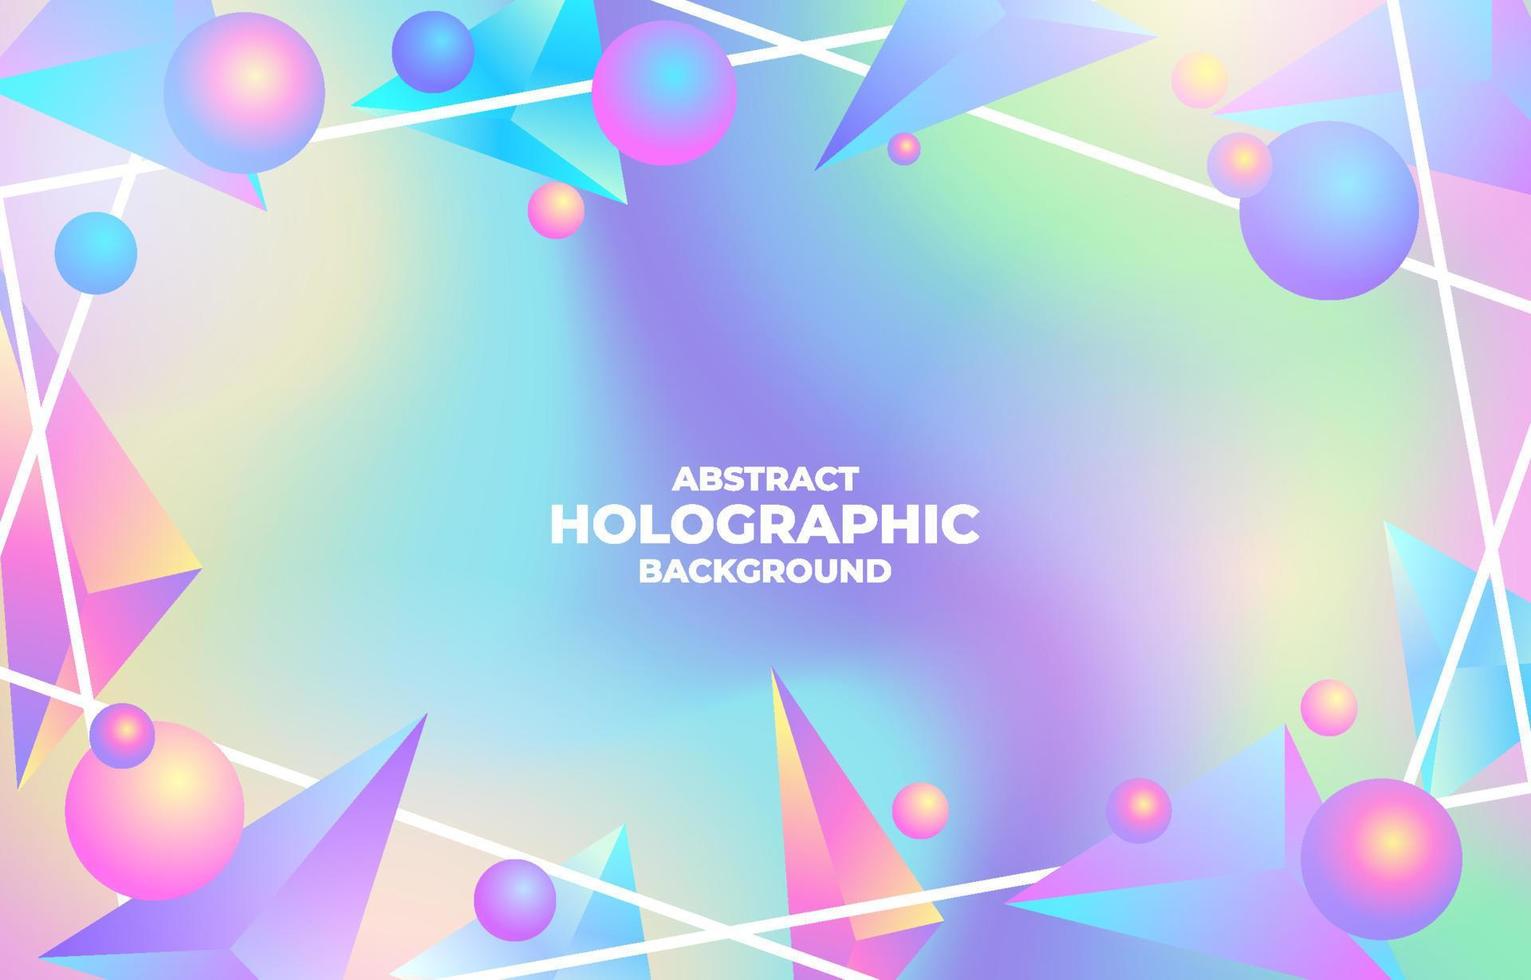 3D Holographic Background vector